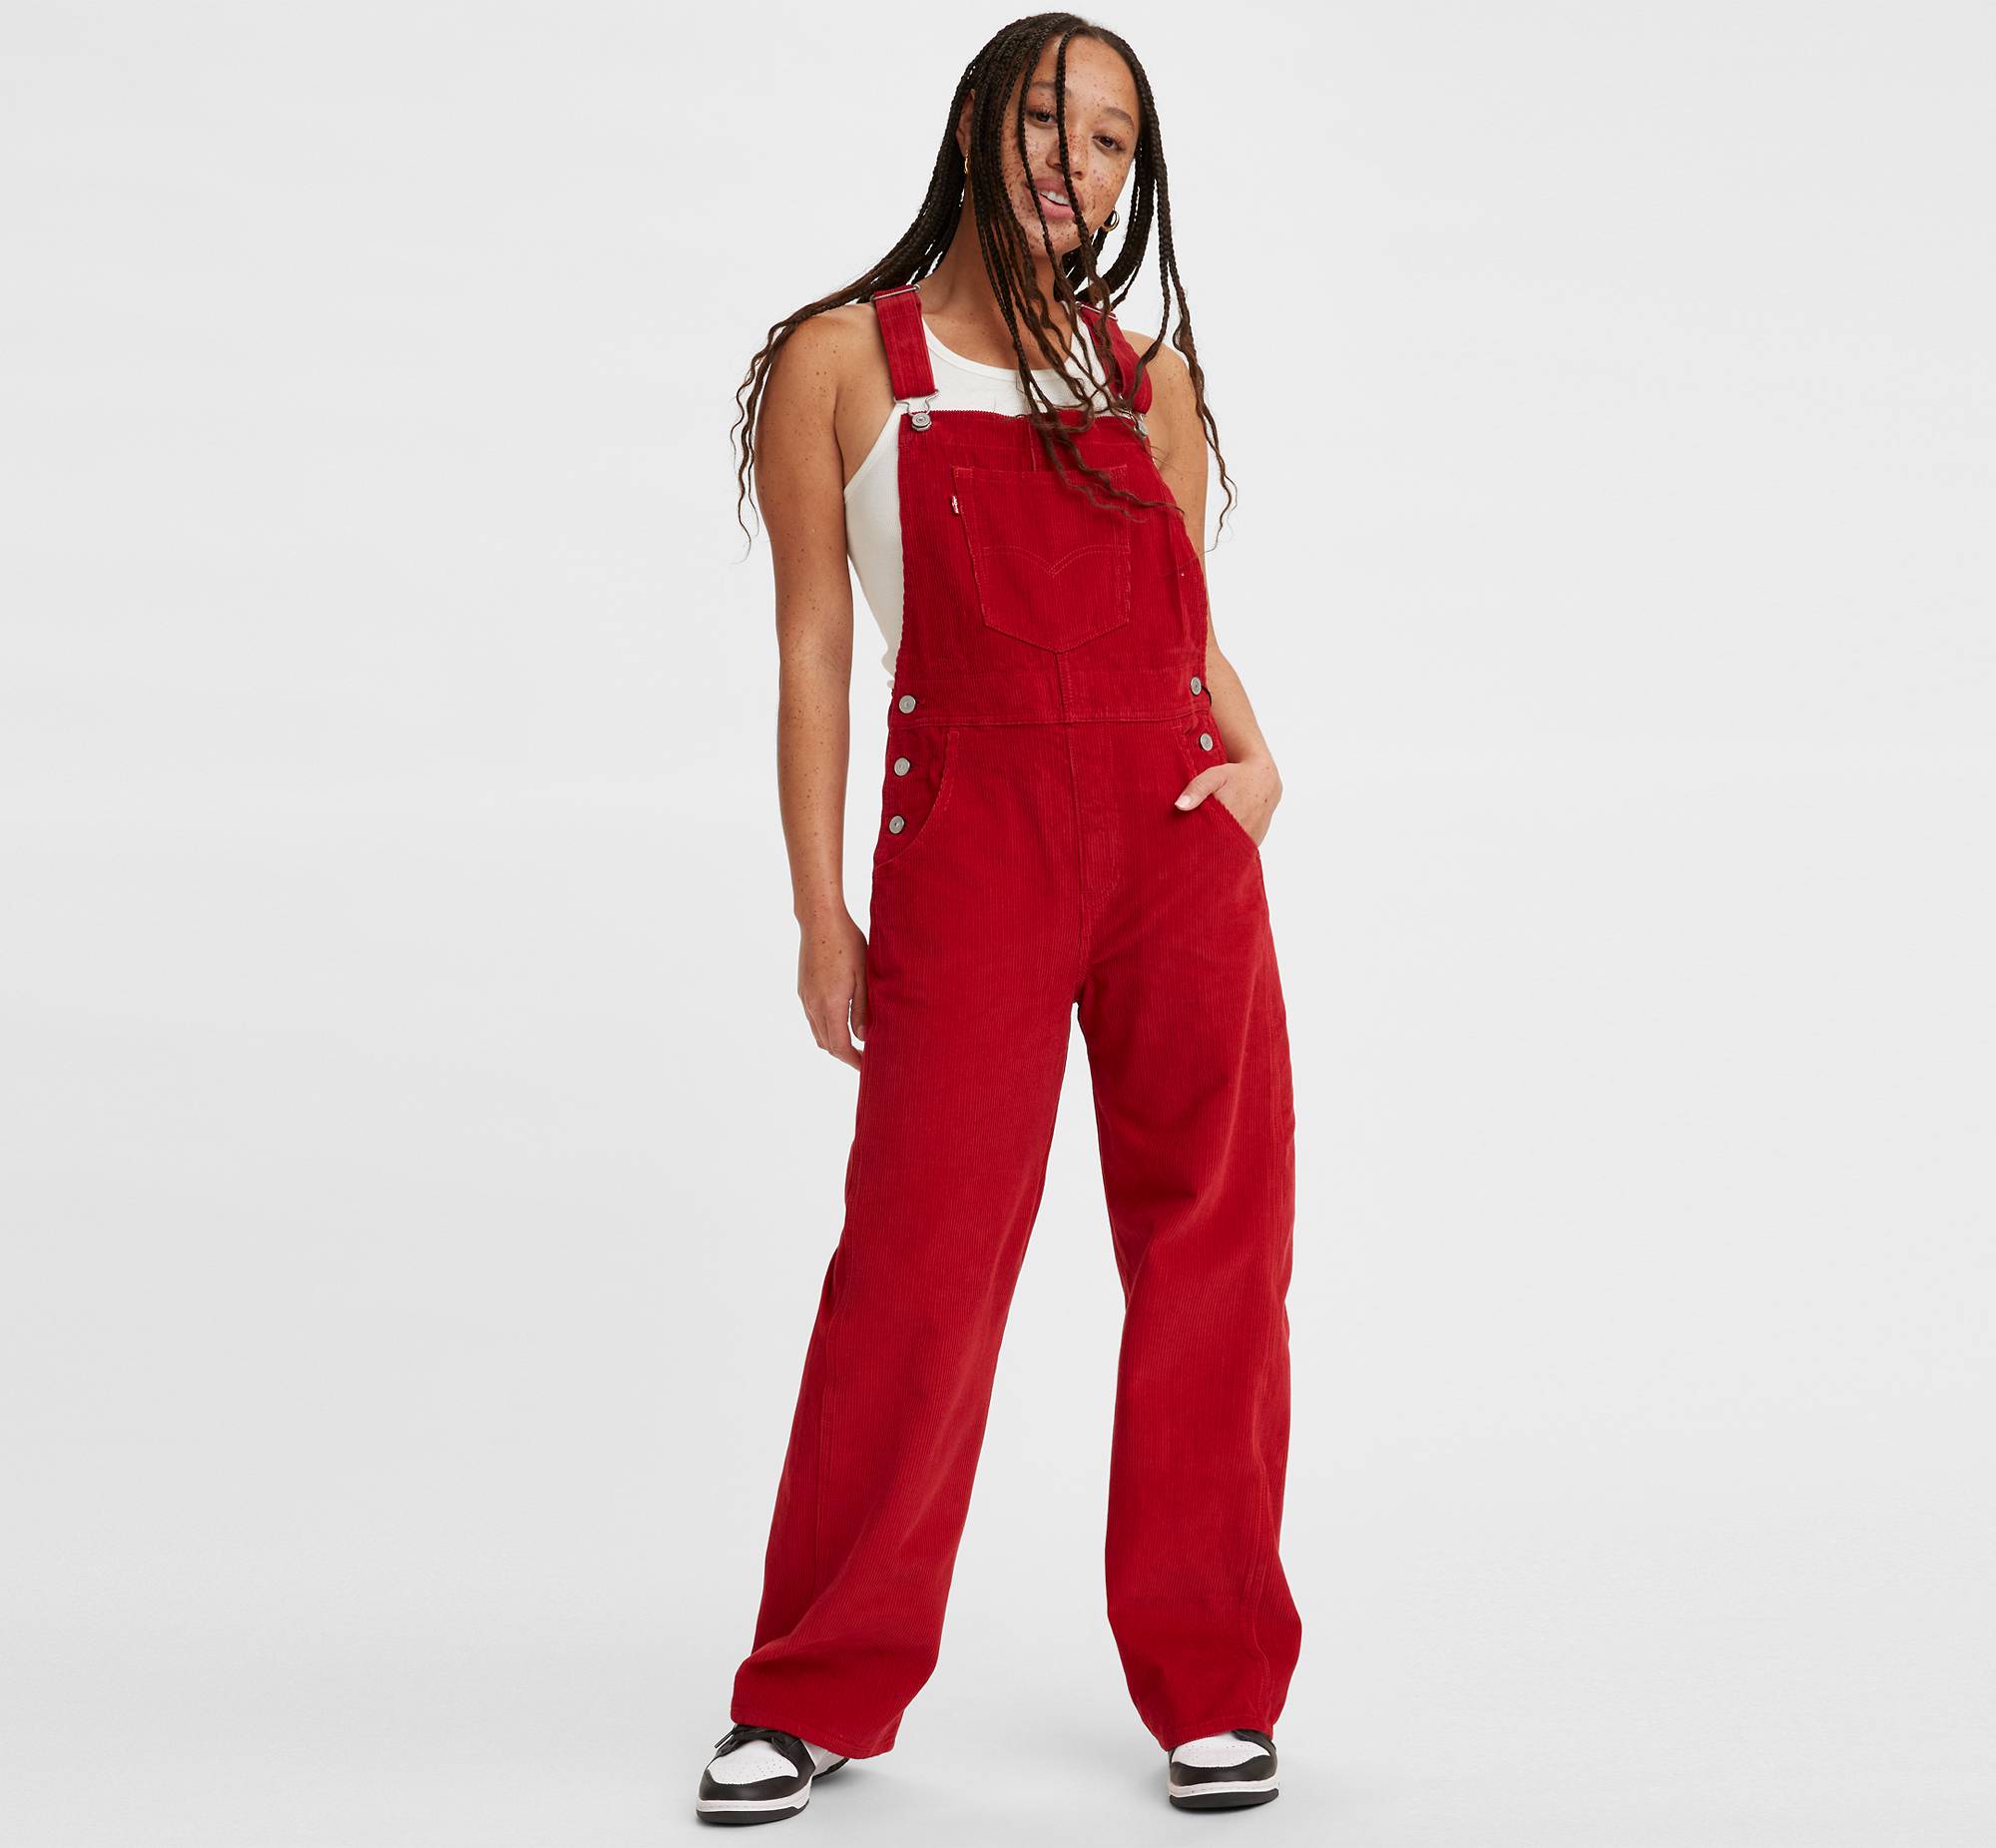 Levi's® X Girls Don't Cry Overalls - Red | Levi's® US